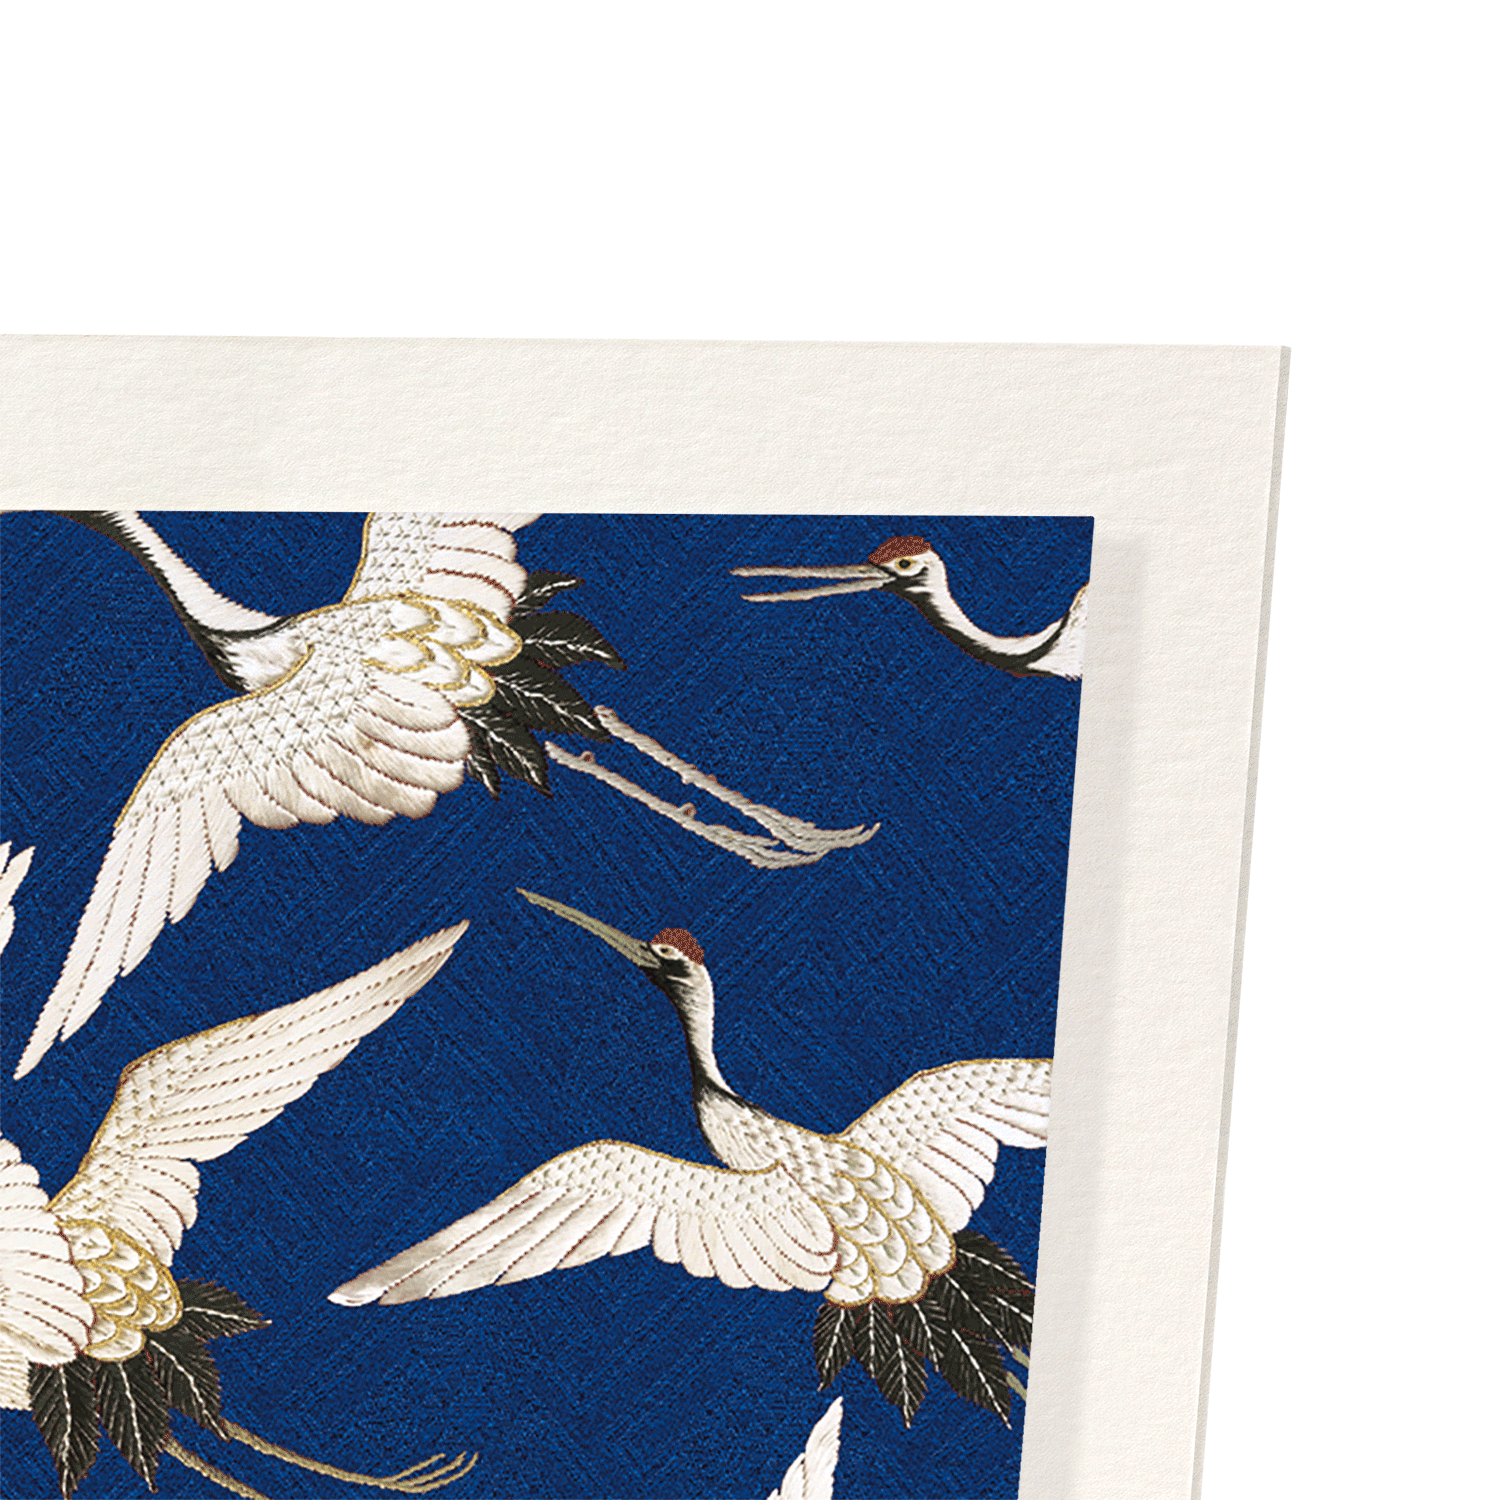 CRANE EMBROIDERY ON BLUE